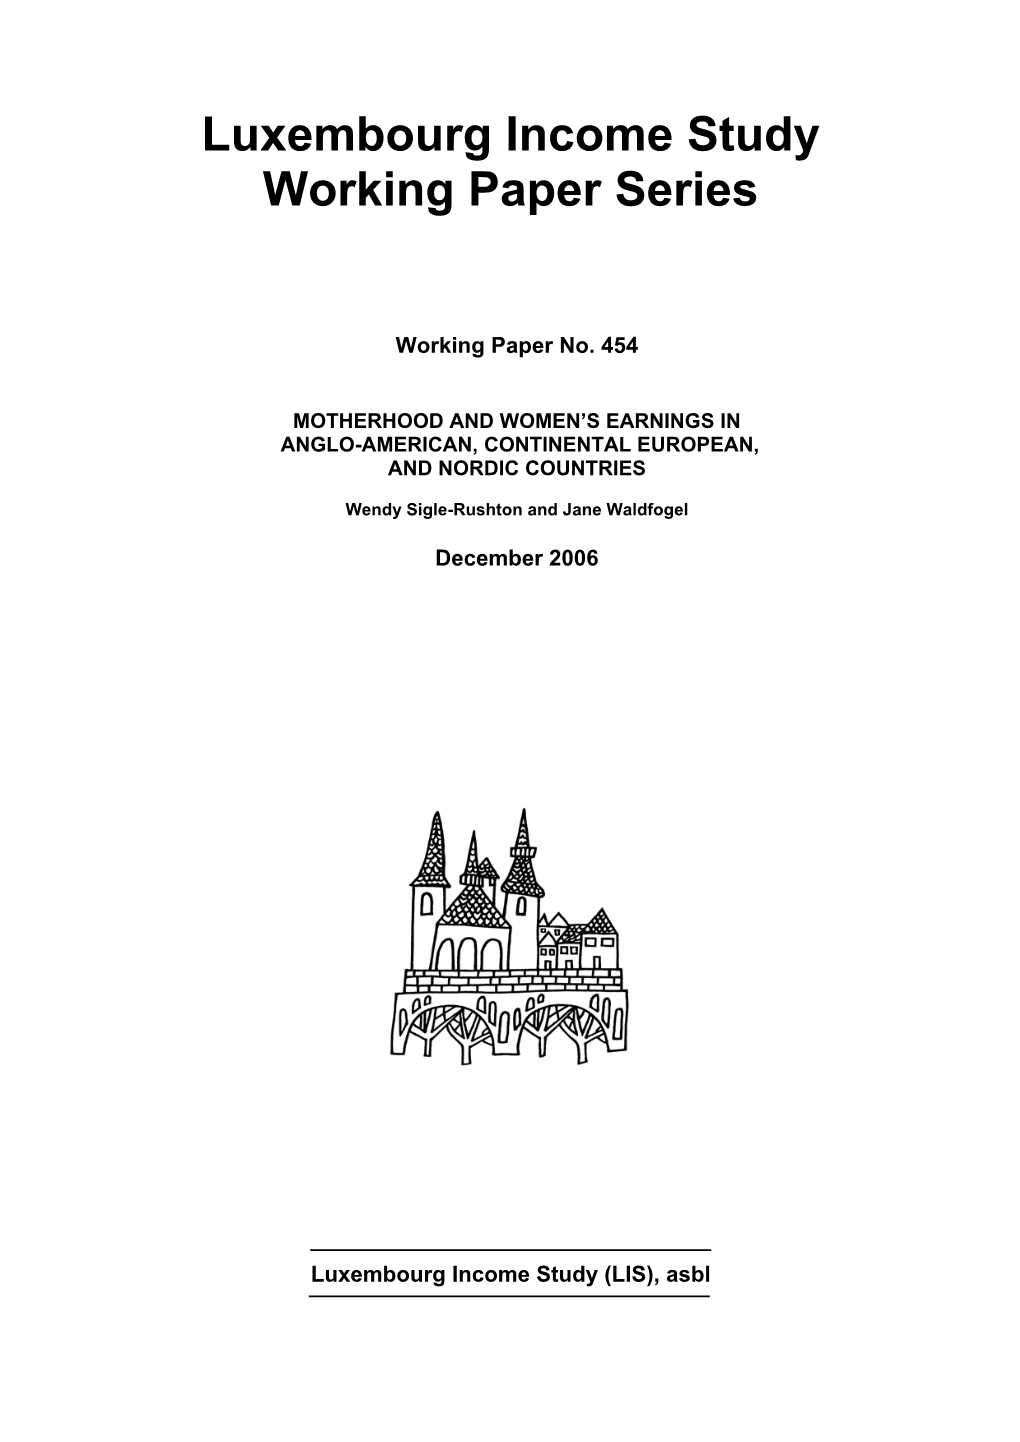 Luxembourg Income Study Working Paper Series